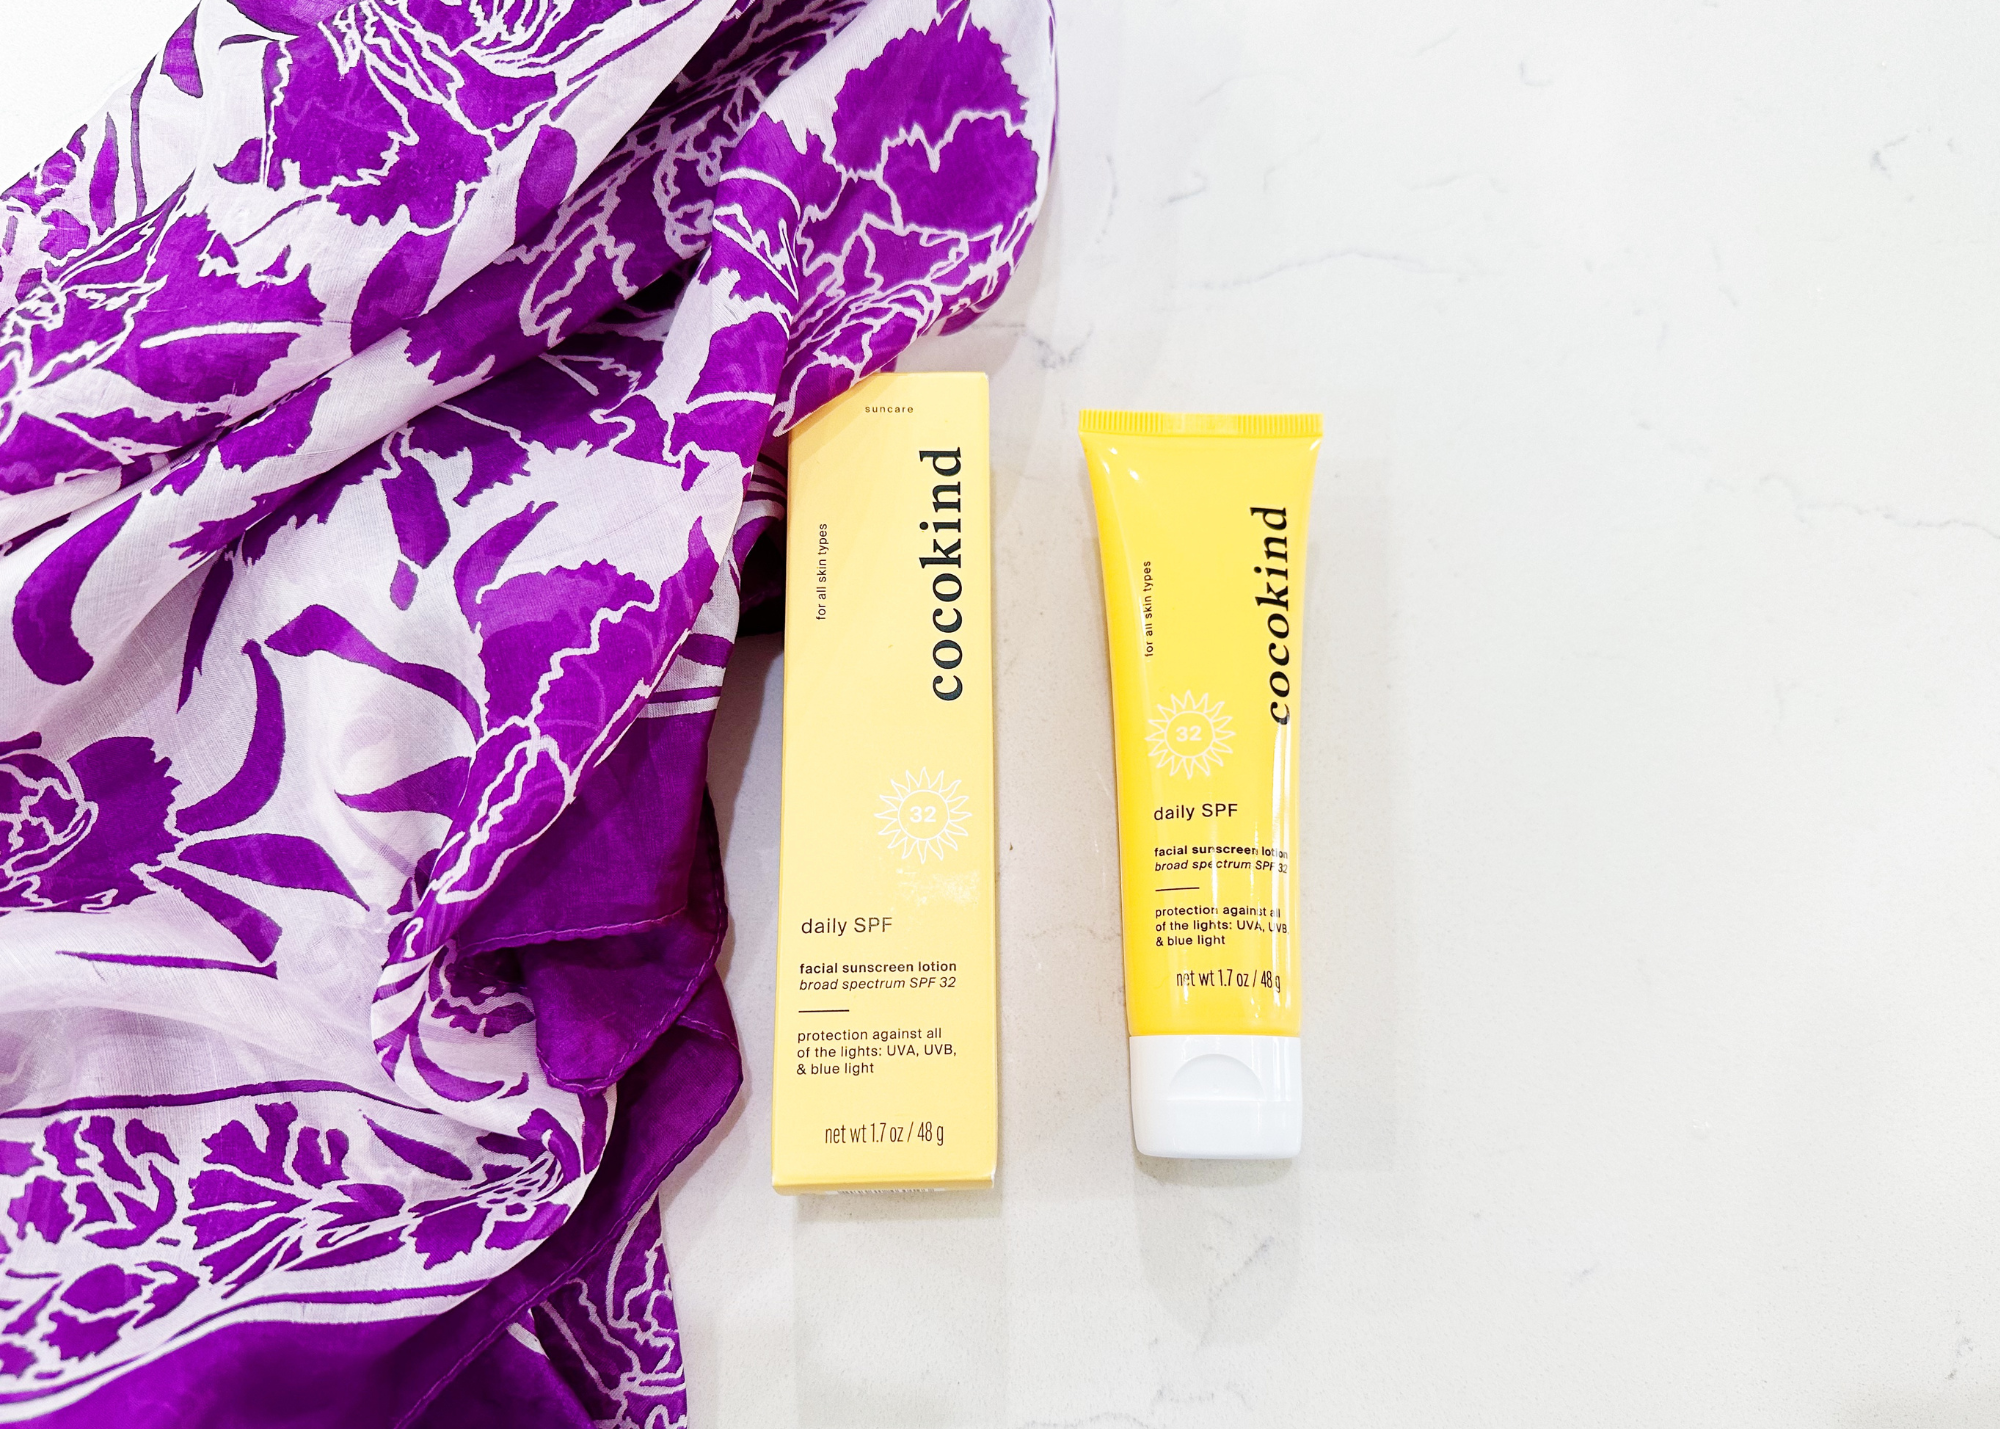 Cocokind Sunscreen Review